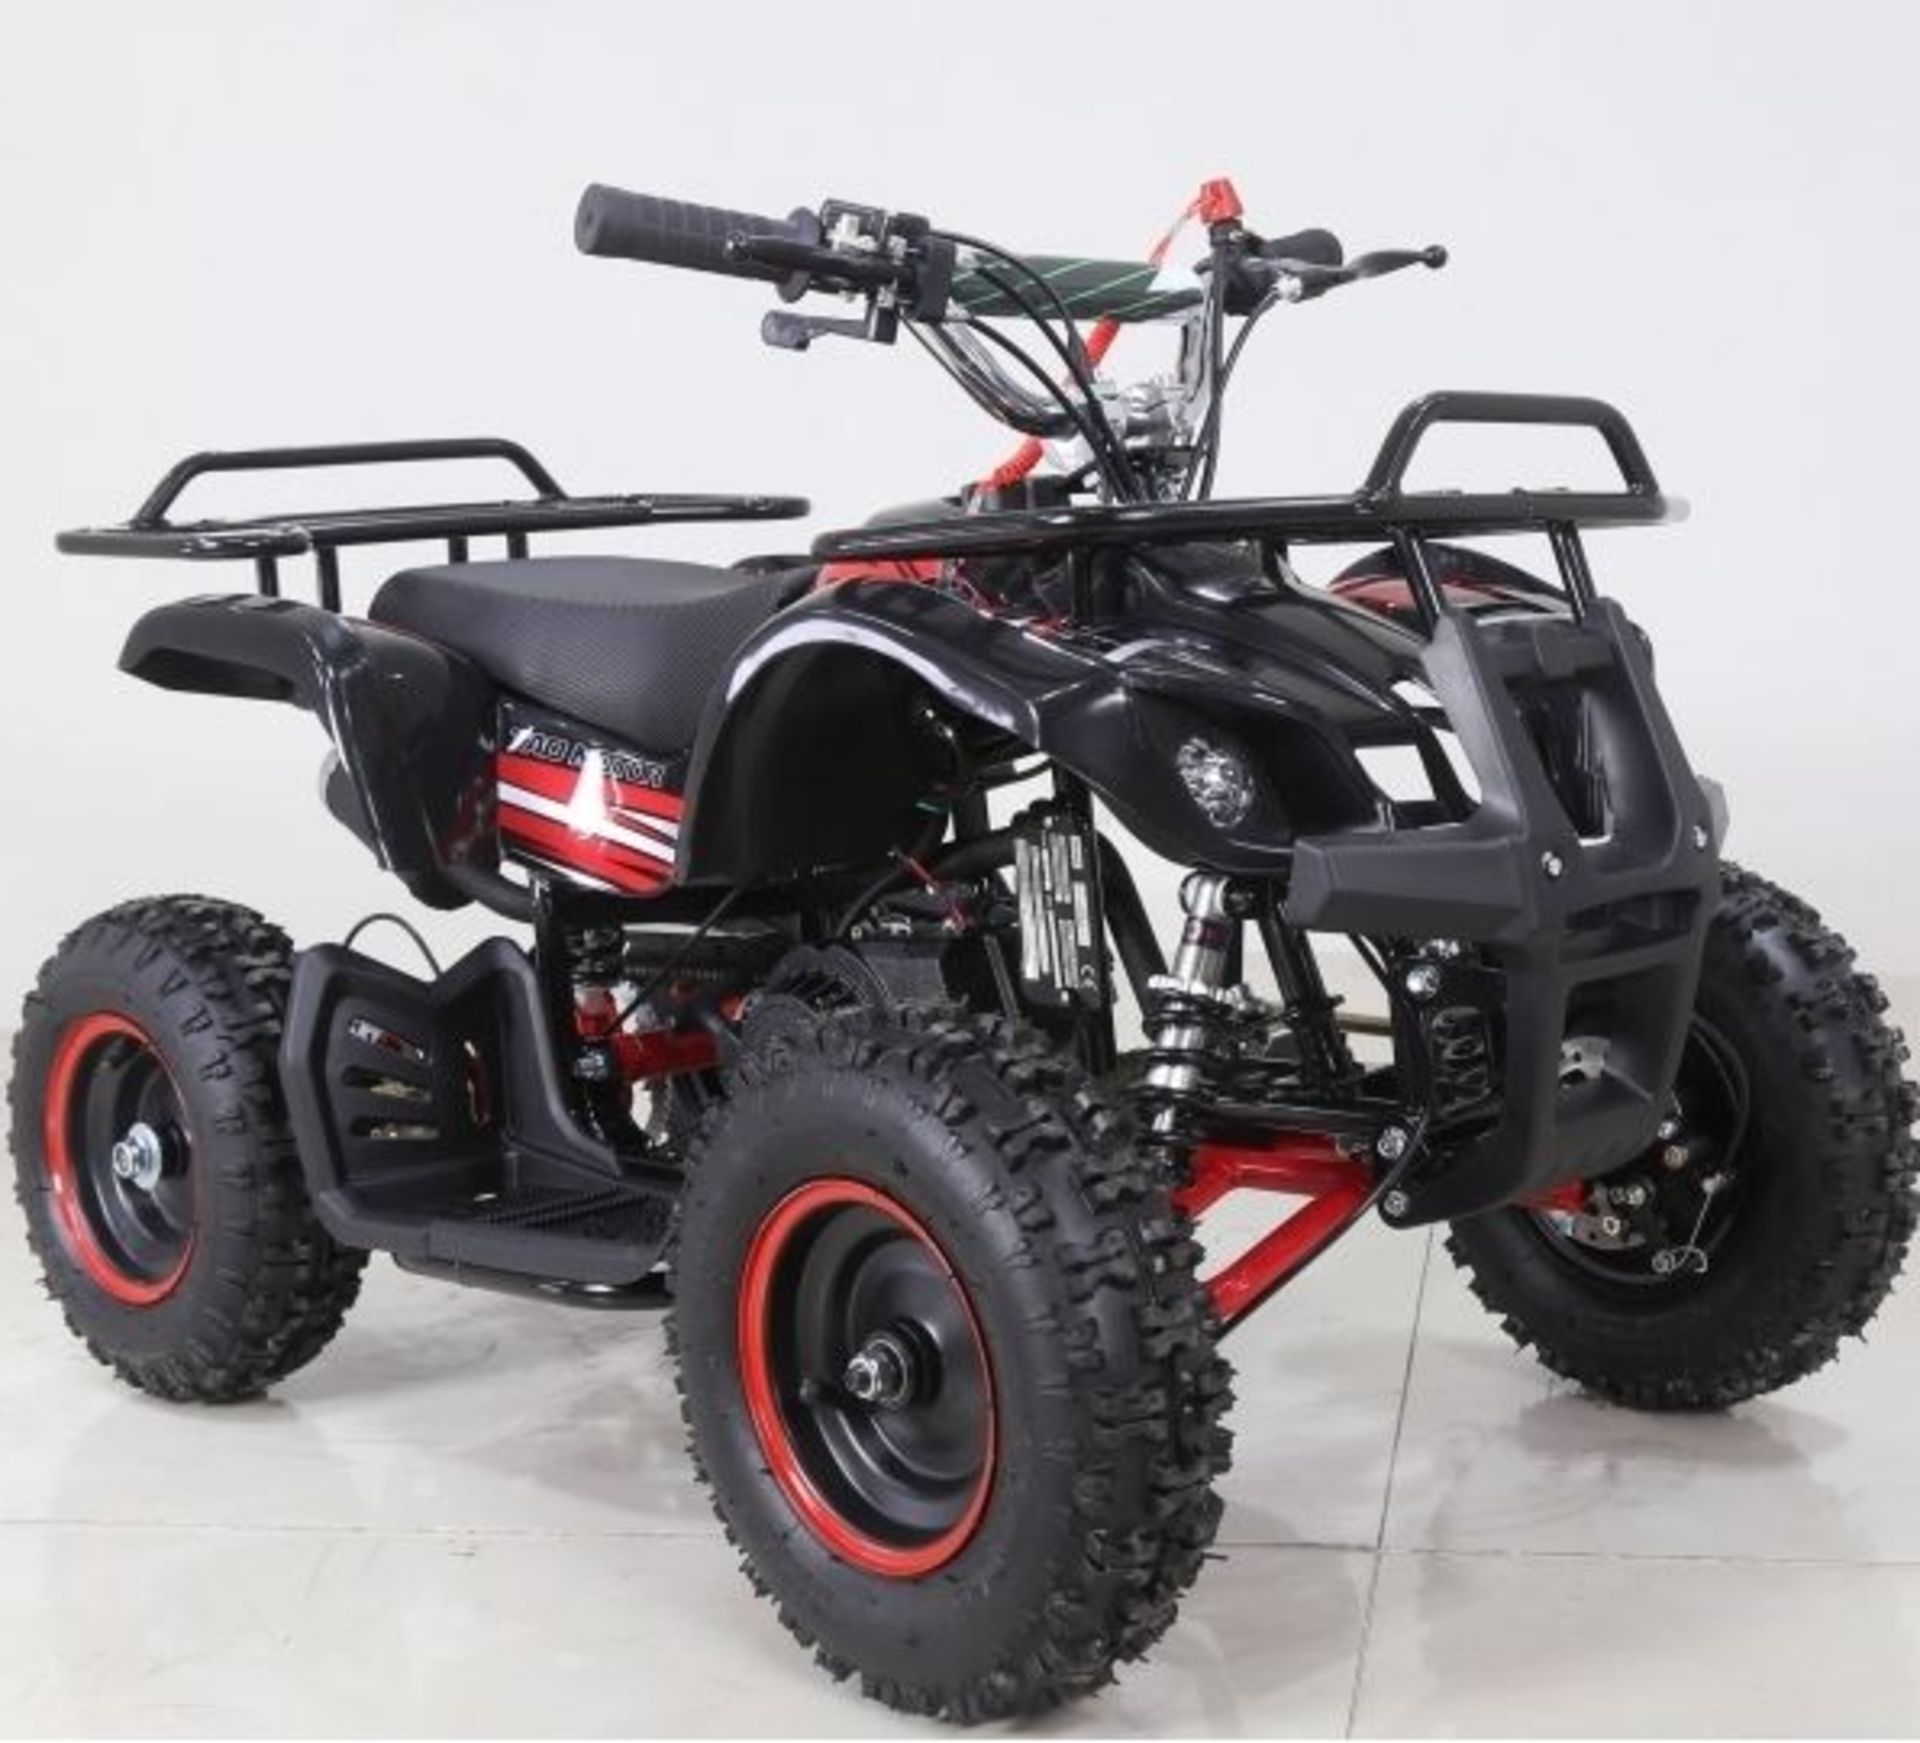 V Brand New 50cc Mini Quad Bike FRM - Colours May Vary - Picture May Vary From Actual Item